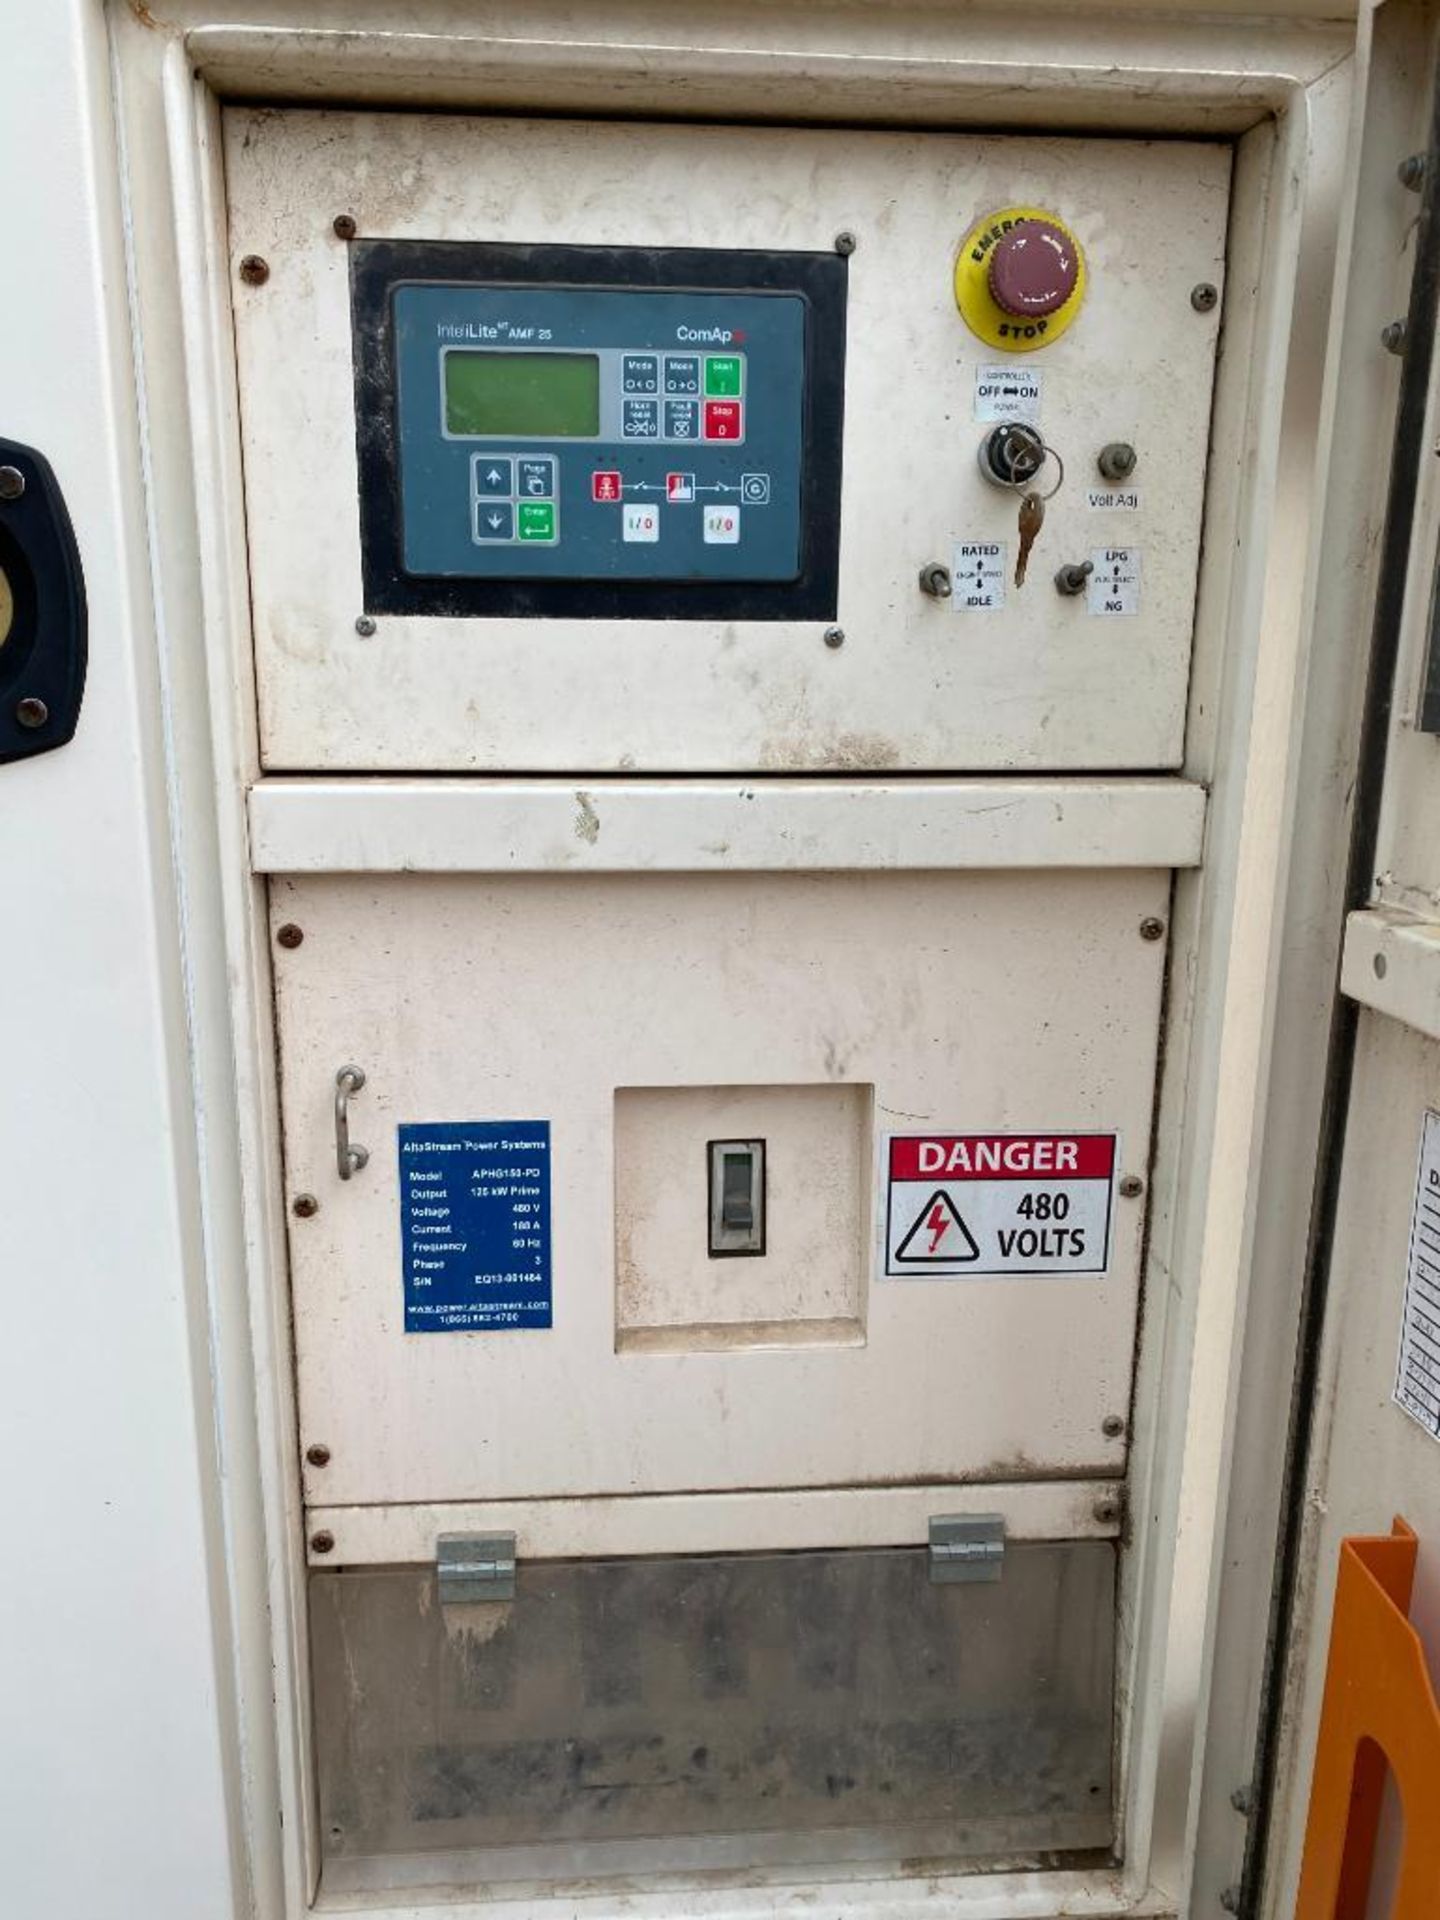 2014 AltaStream Power Systems 125 KVA Towable Generator, Dual Fuel Natural Gas or LP, Model APHG150- - Image 8 of 12